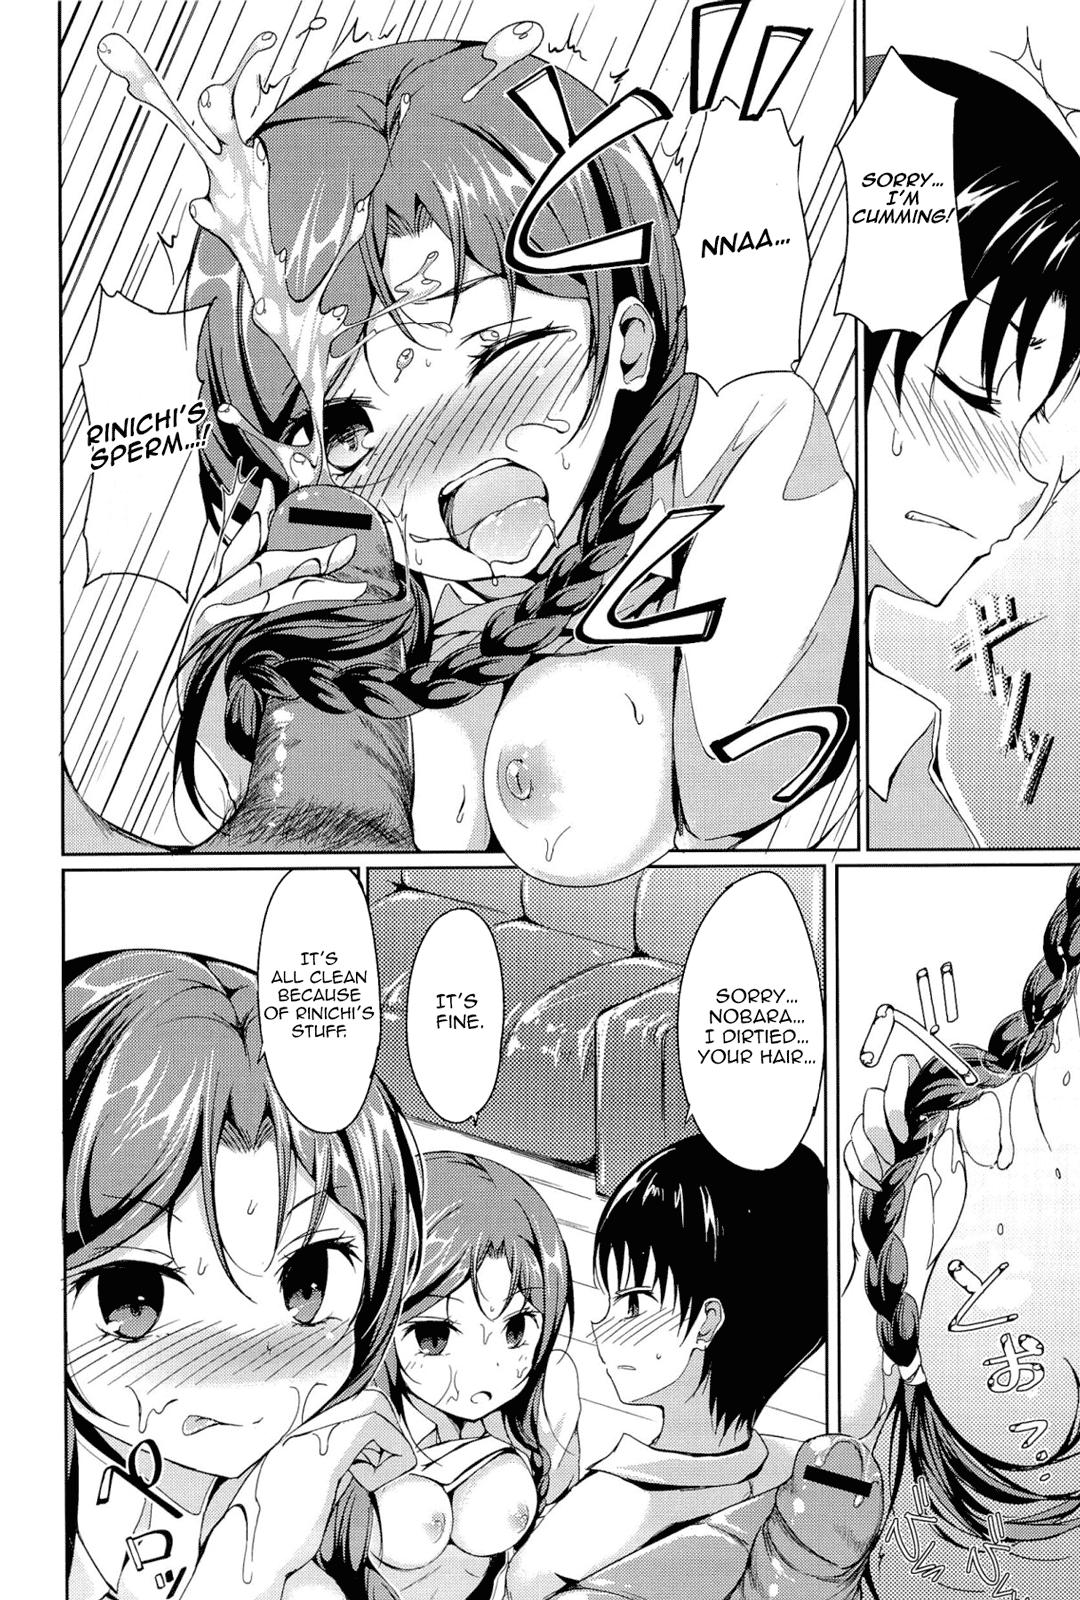 Virtual Disconnect Girl Livesex - Page 12